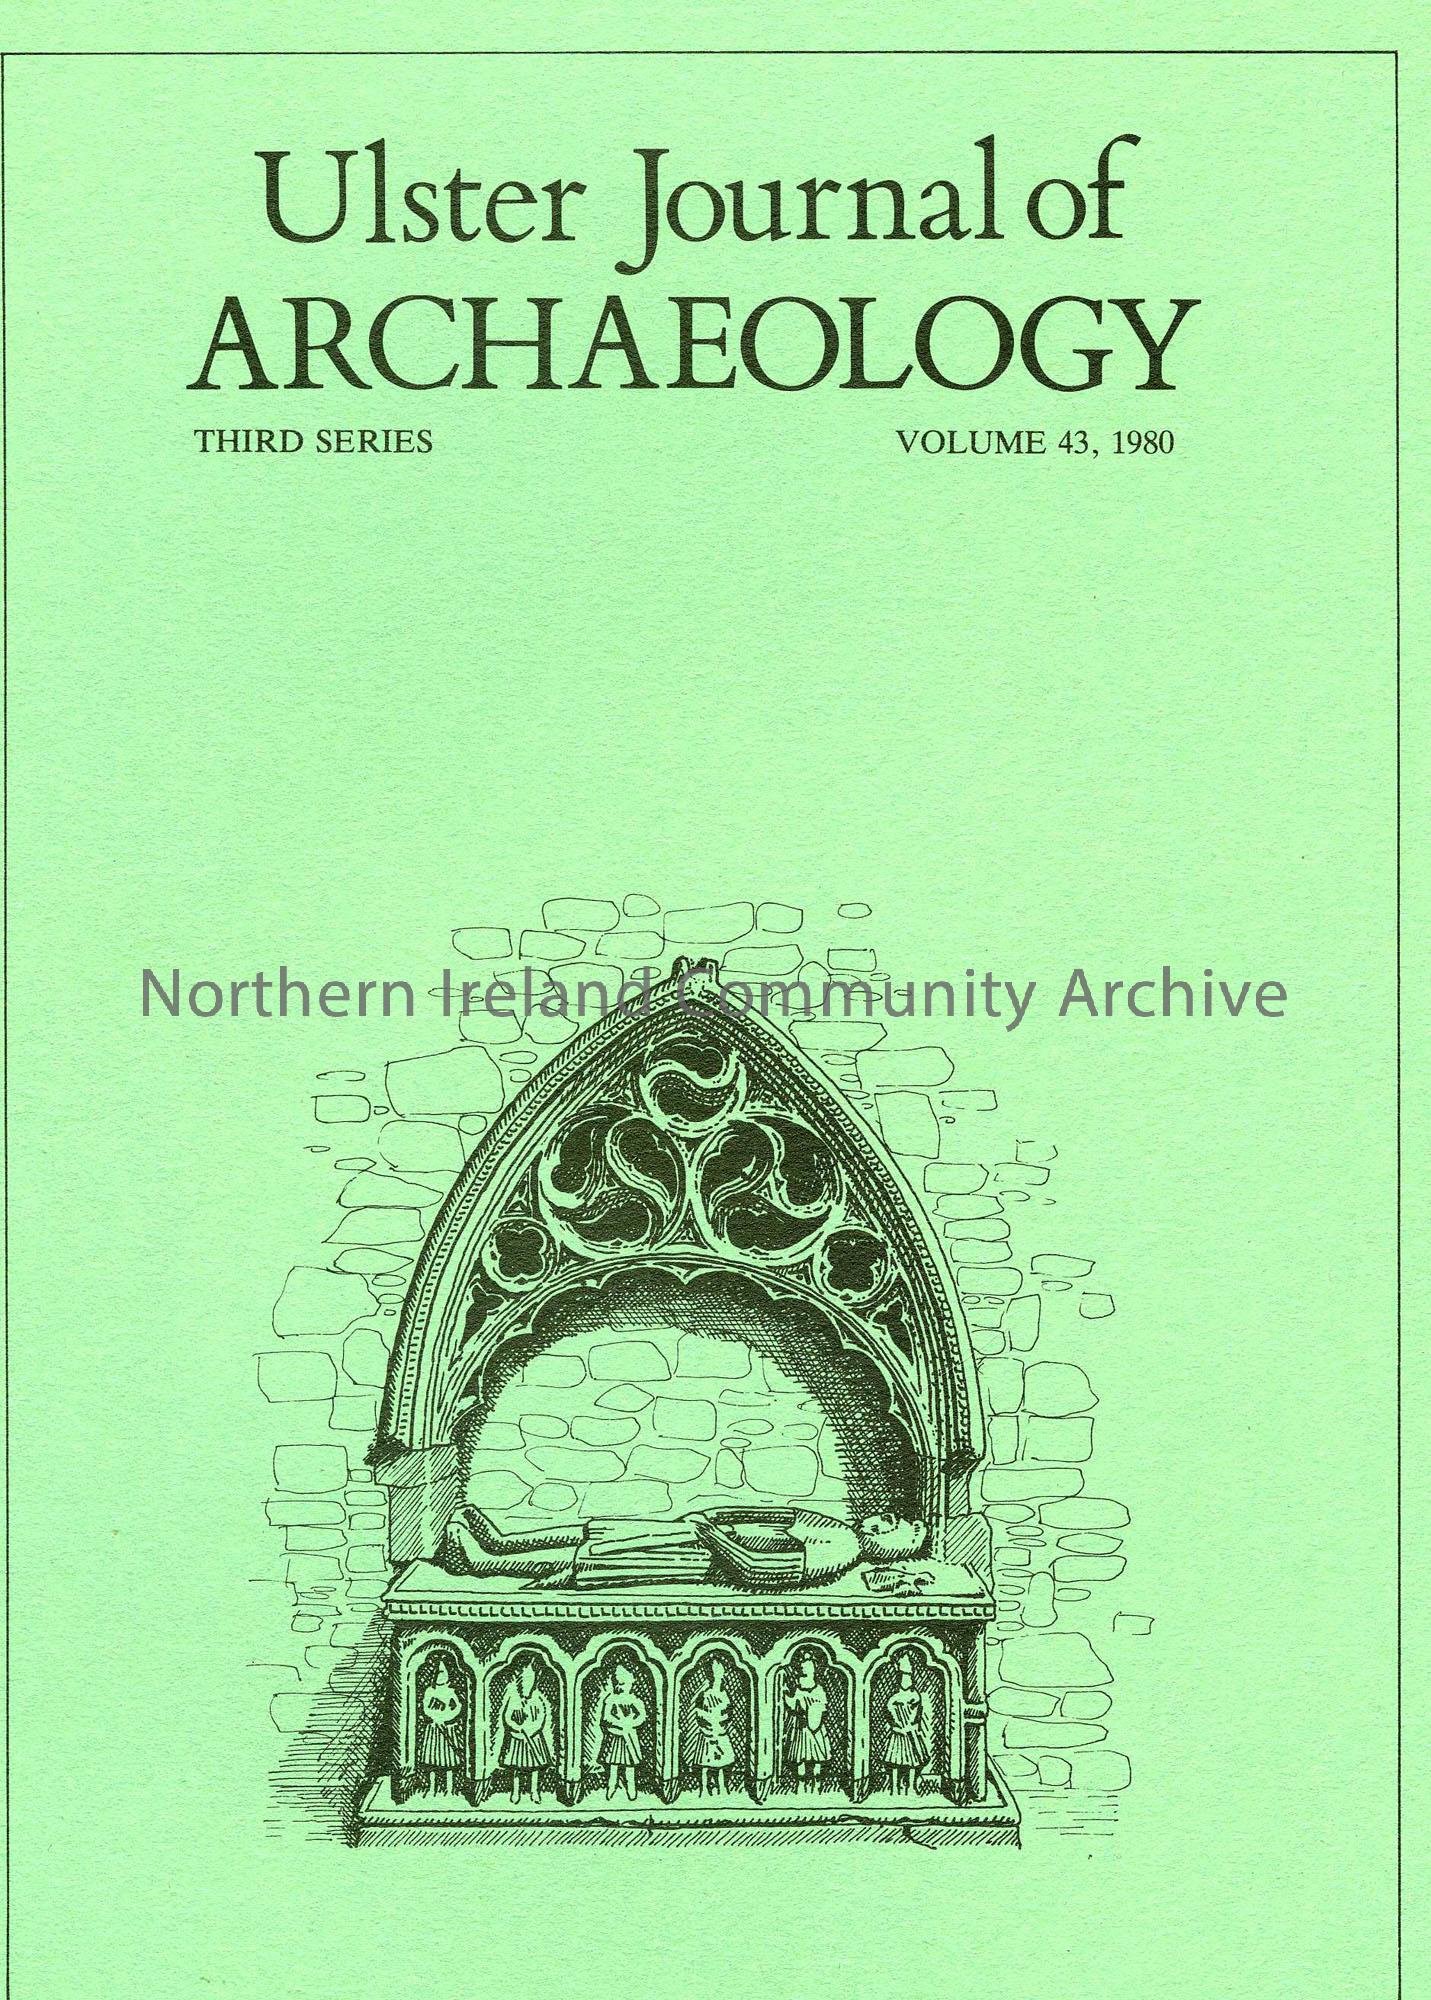 book titled, Ulster Journal of Archaeology. Third Series Volume 43, 1980 (4319)